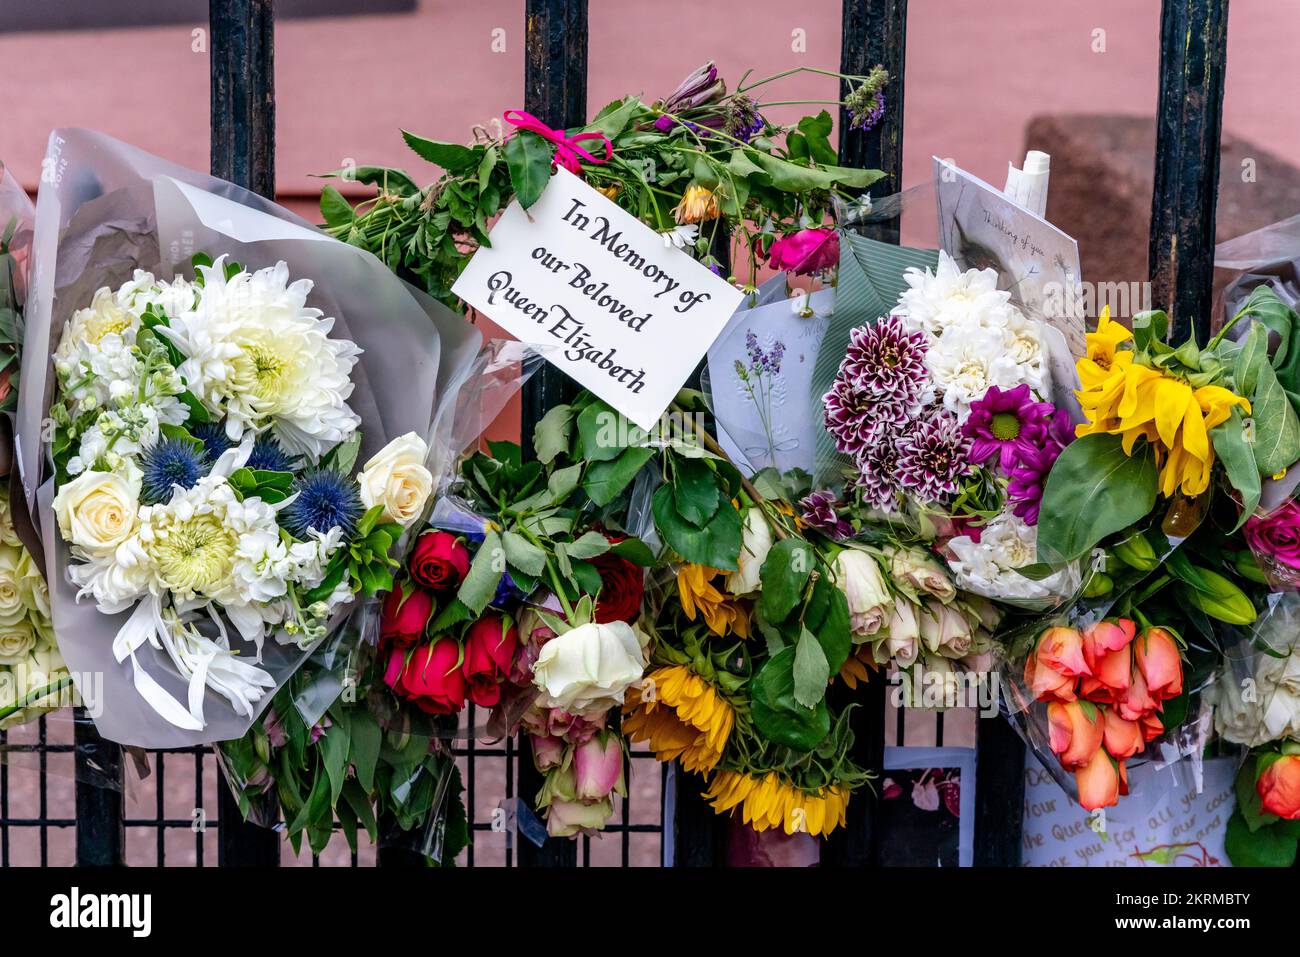 Floral Tributes Outside The Gates Of Buckingham Palace After The Death Of Queen Elizabeth II, London, UK. Stock Photo